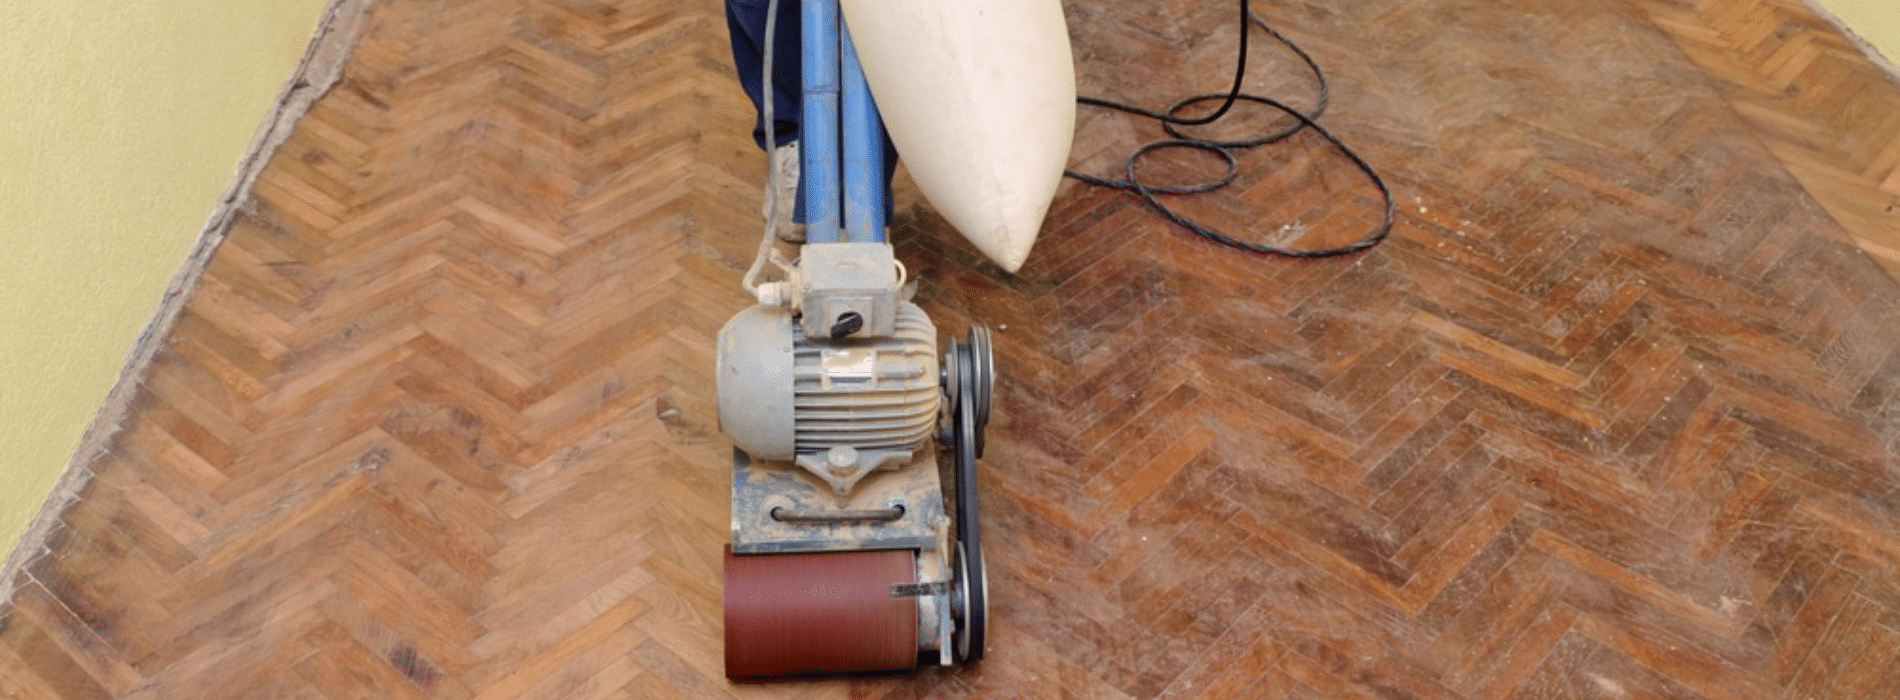 Mr Sander® in Winchmore Hill, N21, employing the powerful Bona Belt Effect sander (2.2 kW) for sanding herringbone floors. Operating at 230V and 50Hz/60Hz, this 250x750 mm sander, equipped with a dust extraction system and HEPA filter, guarantees a pristine and efficient outcome.